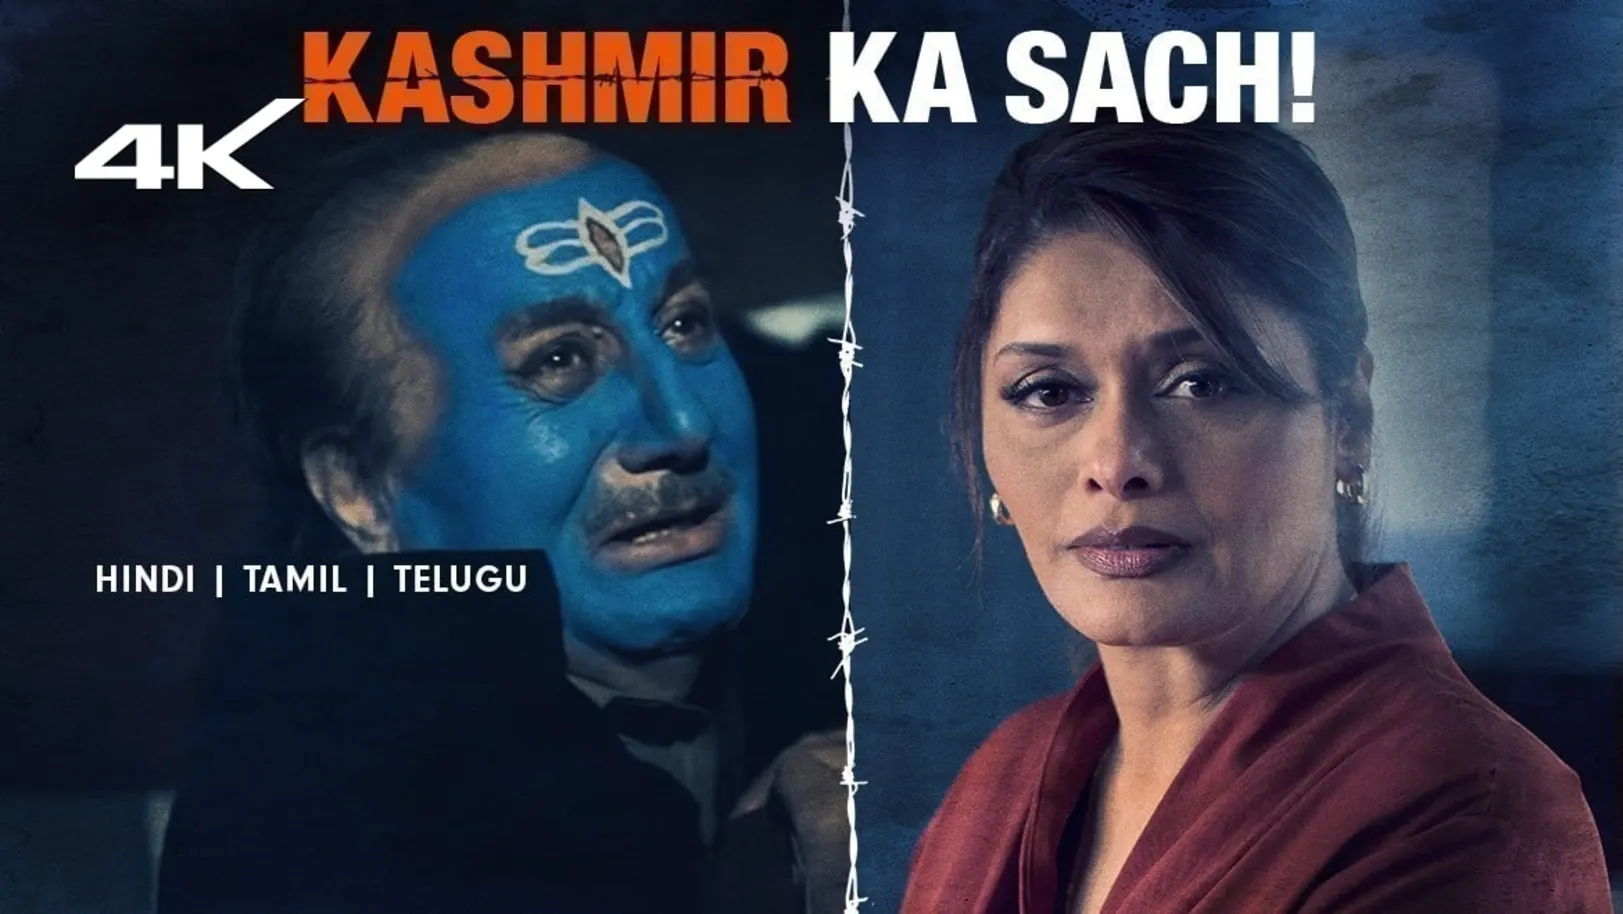 The Kashmir Files: Unreported Web Series